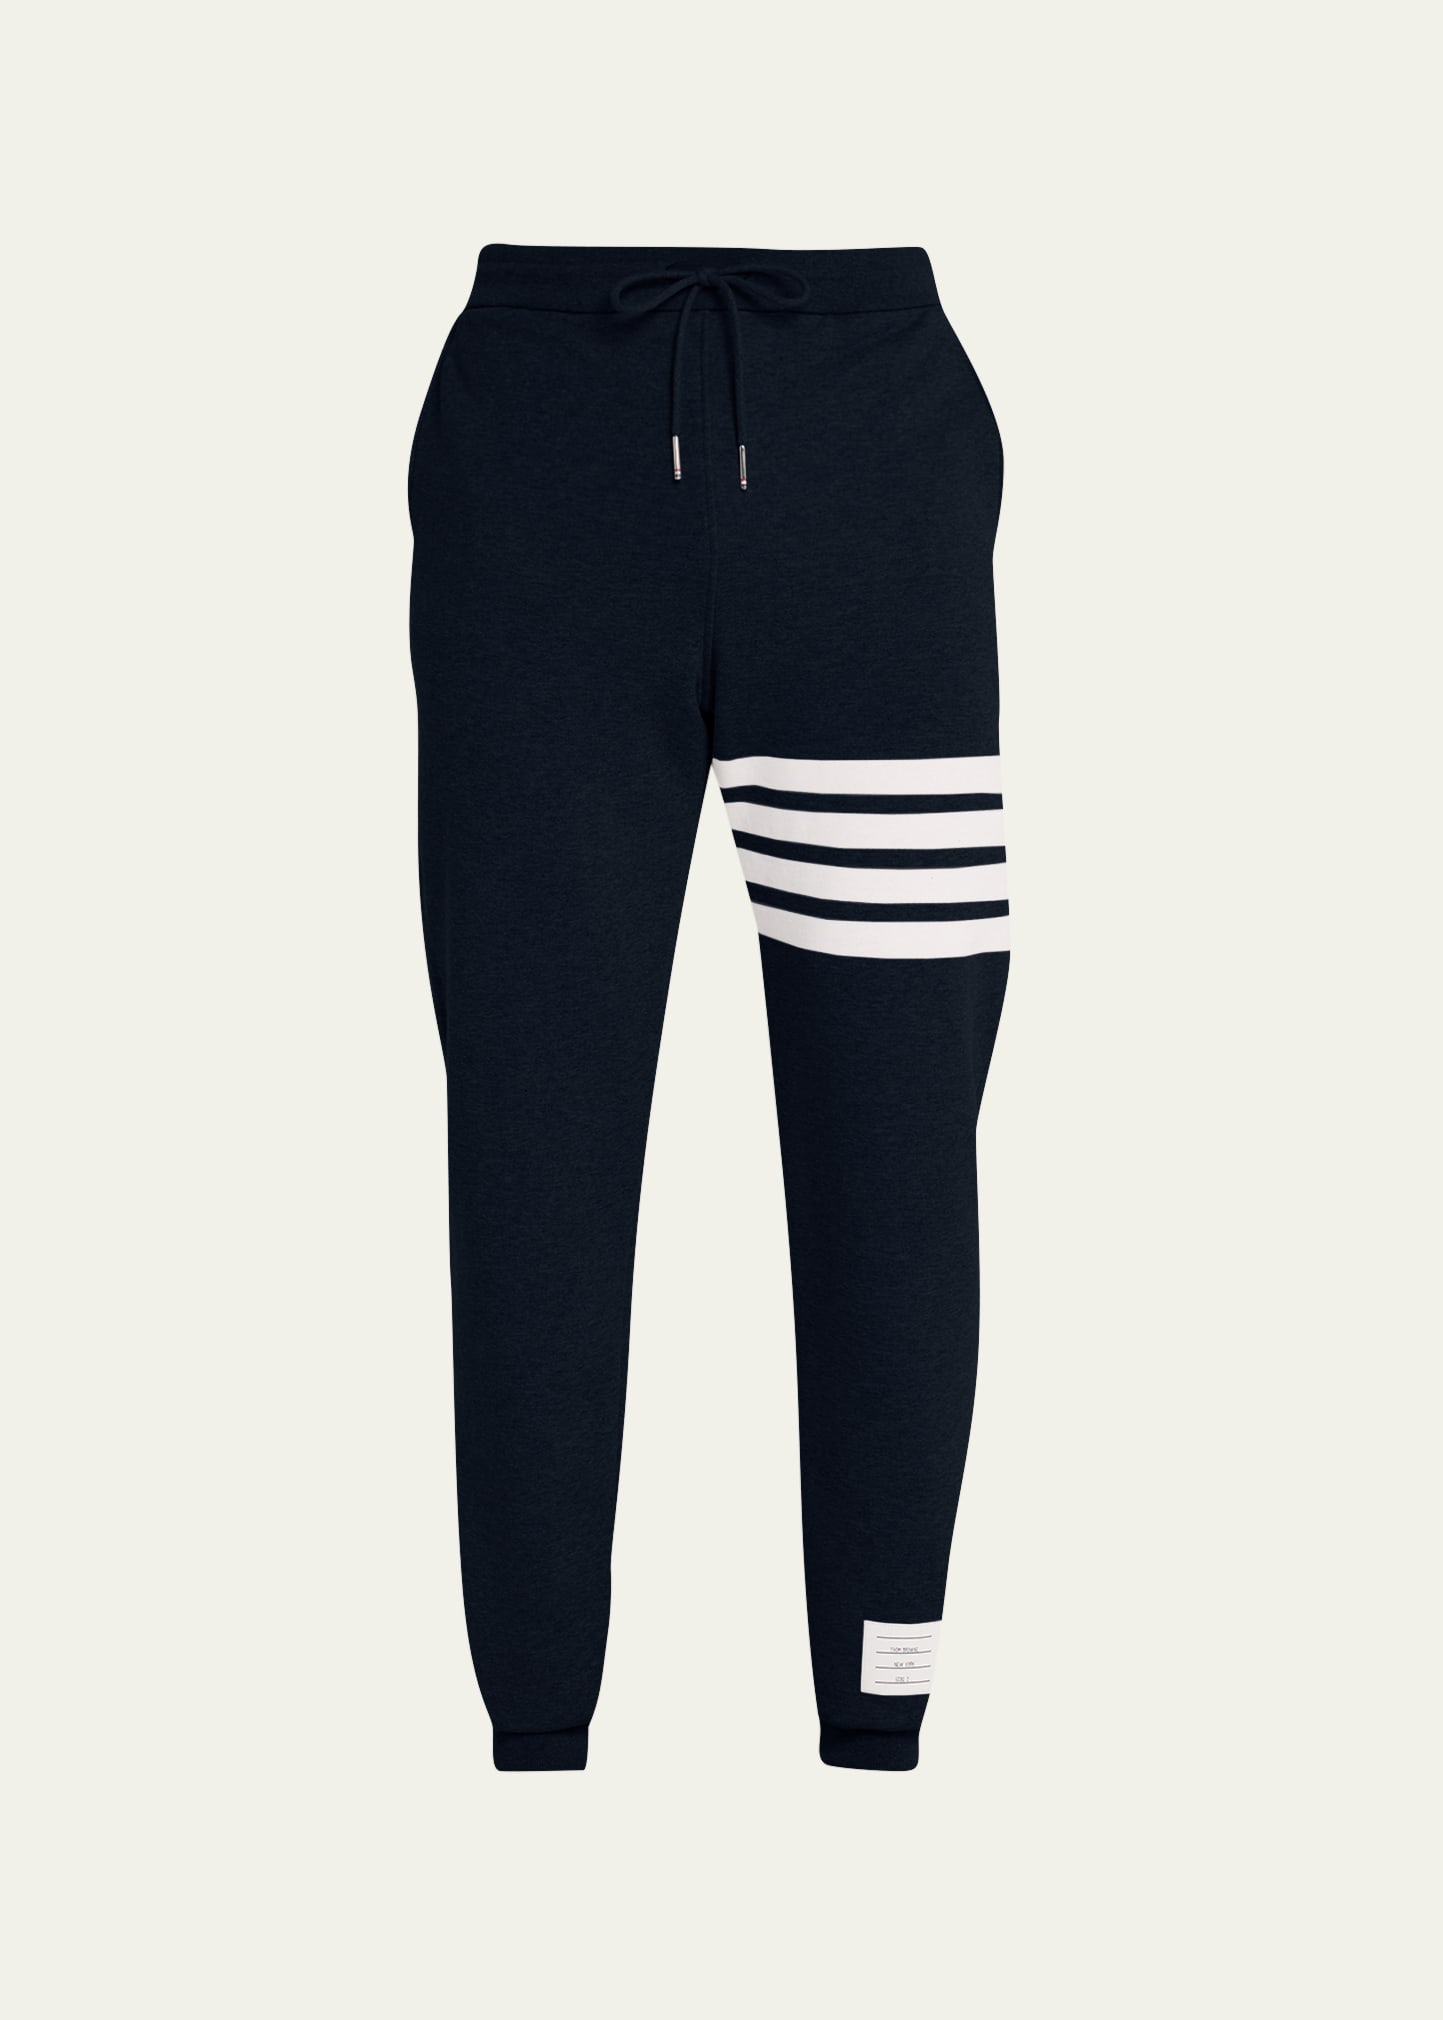 Thom Browne Men's Classic Drawstring Sweatpants With Stripe Detail In Navy